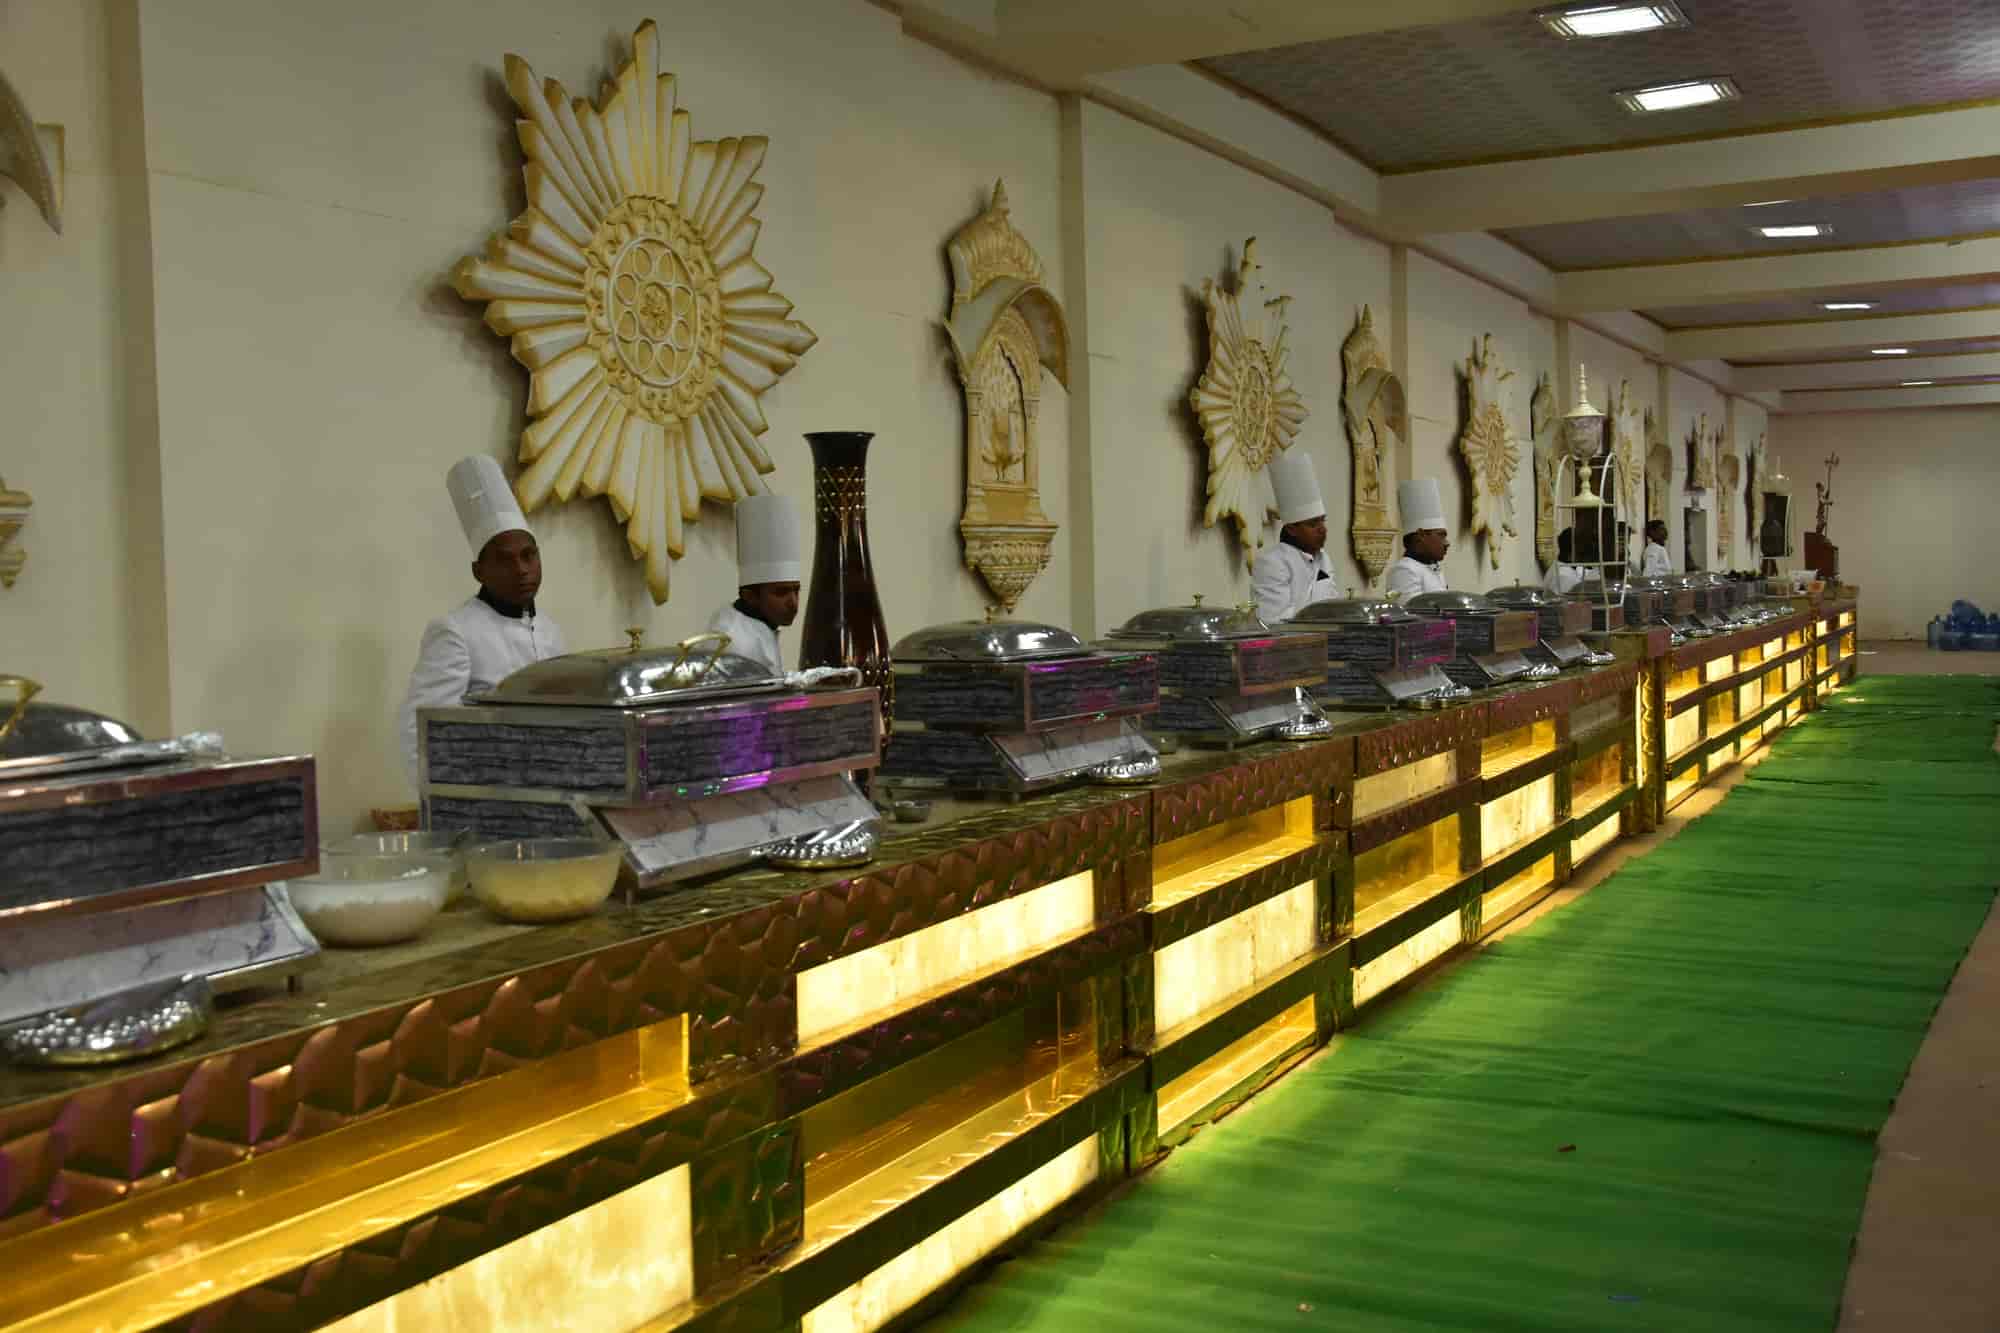 Kaushal Caterers